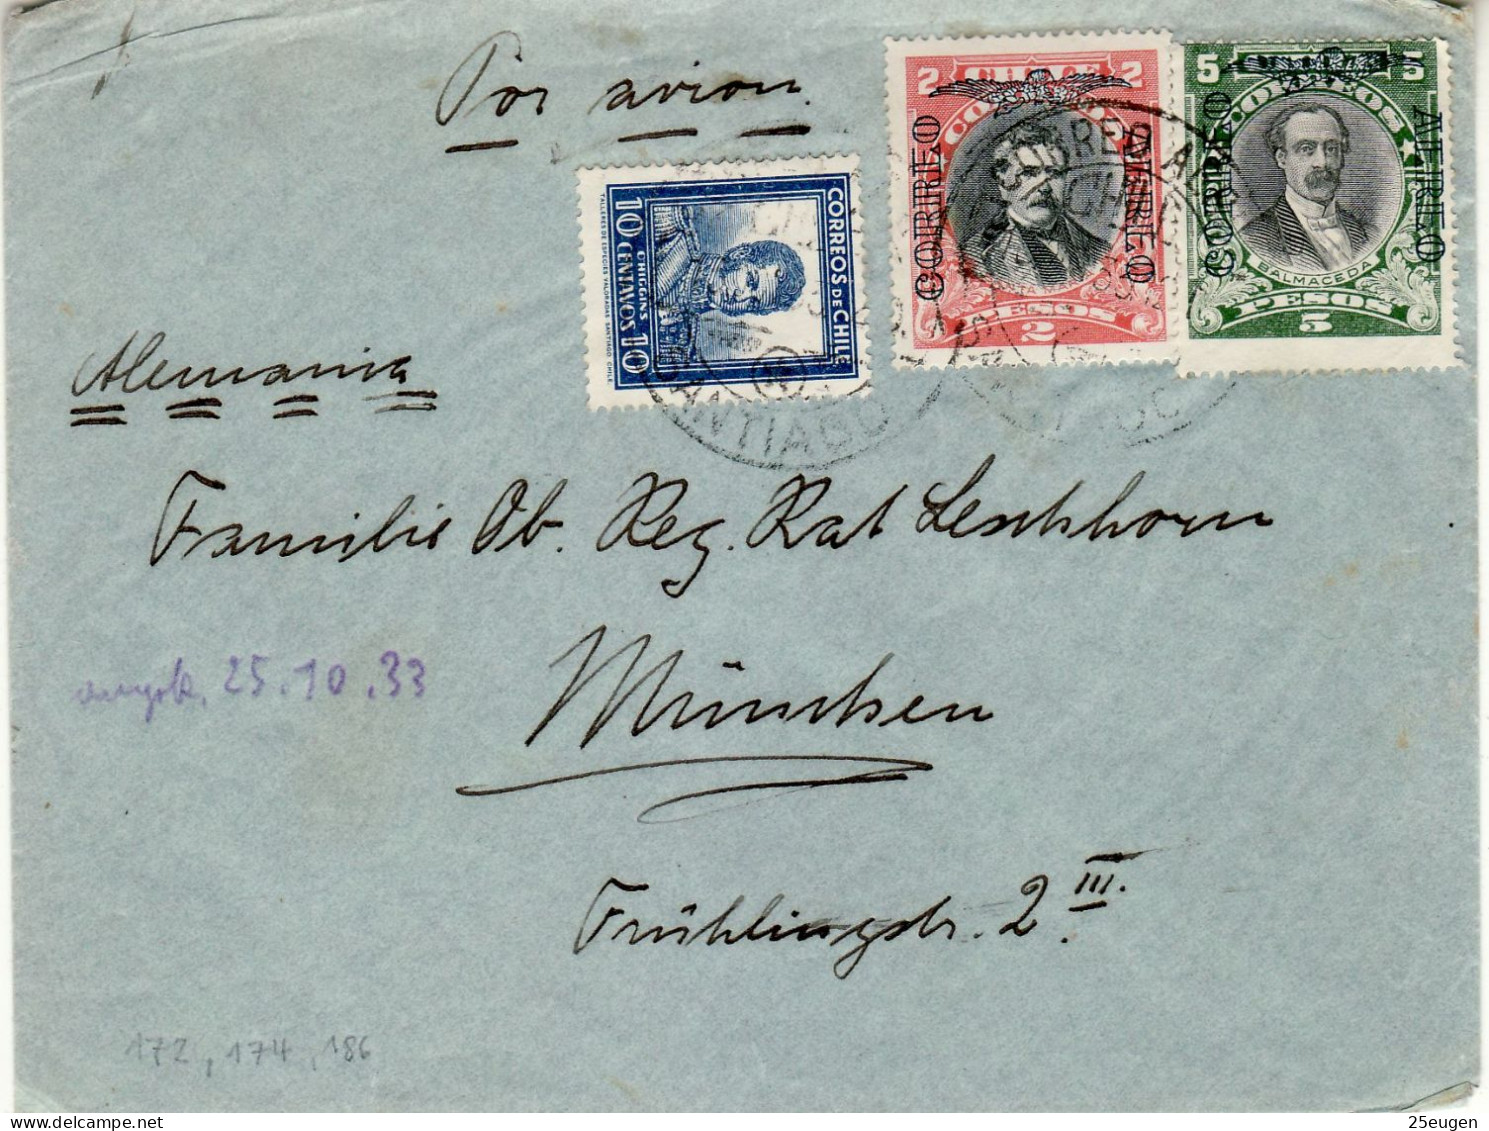 CHILE 1933 AIRMAIL LETTER SENT FROM SANTIAGO TO MUENCHEN - Chile